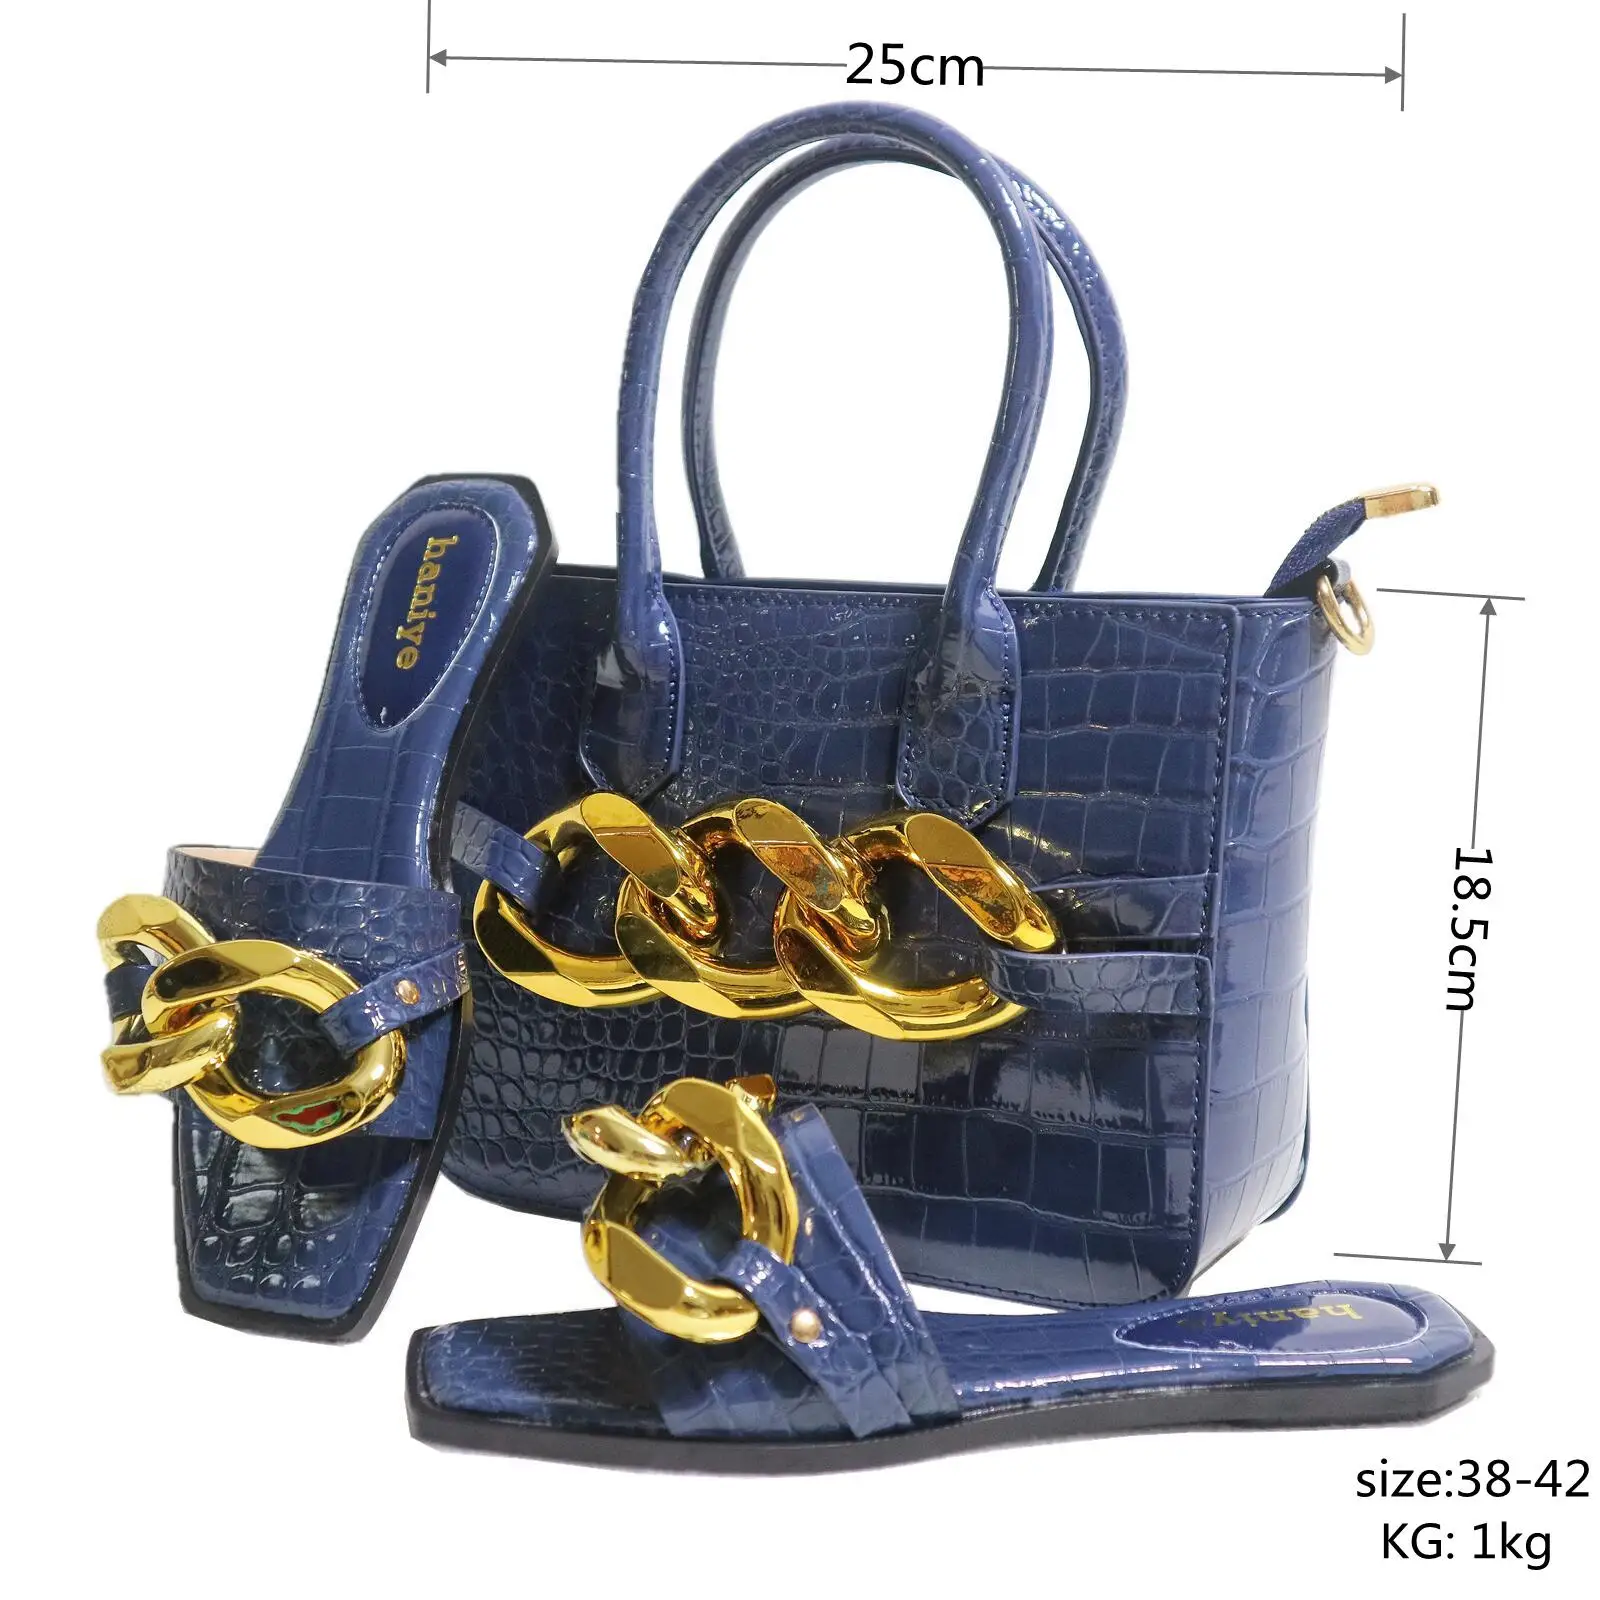 Fashion Women Nice Color Shoes and Bag Set to Match 7cm High Quality Italian Shoes with Matching Bags for Party! WENZHAN B93-2 Wine / 7.5